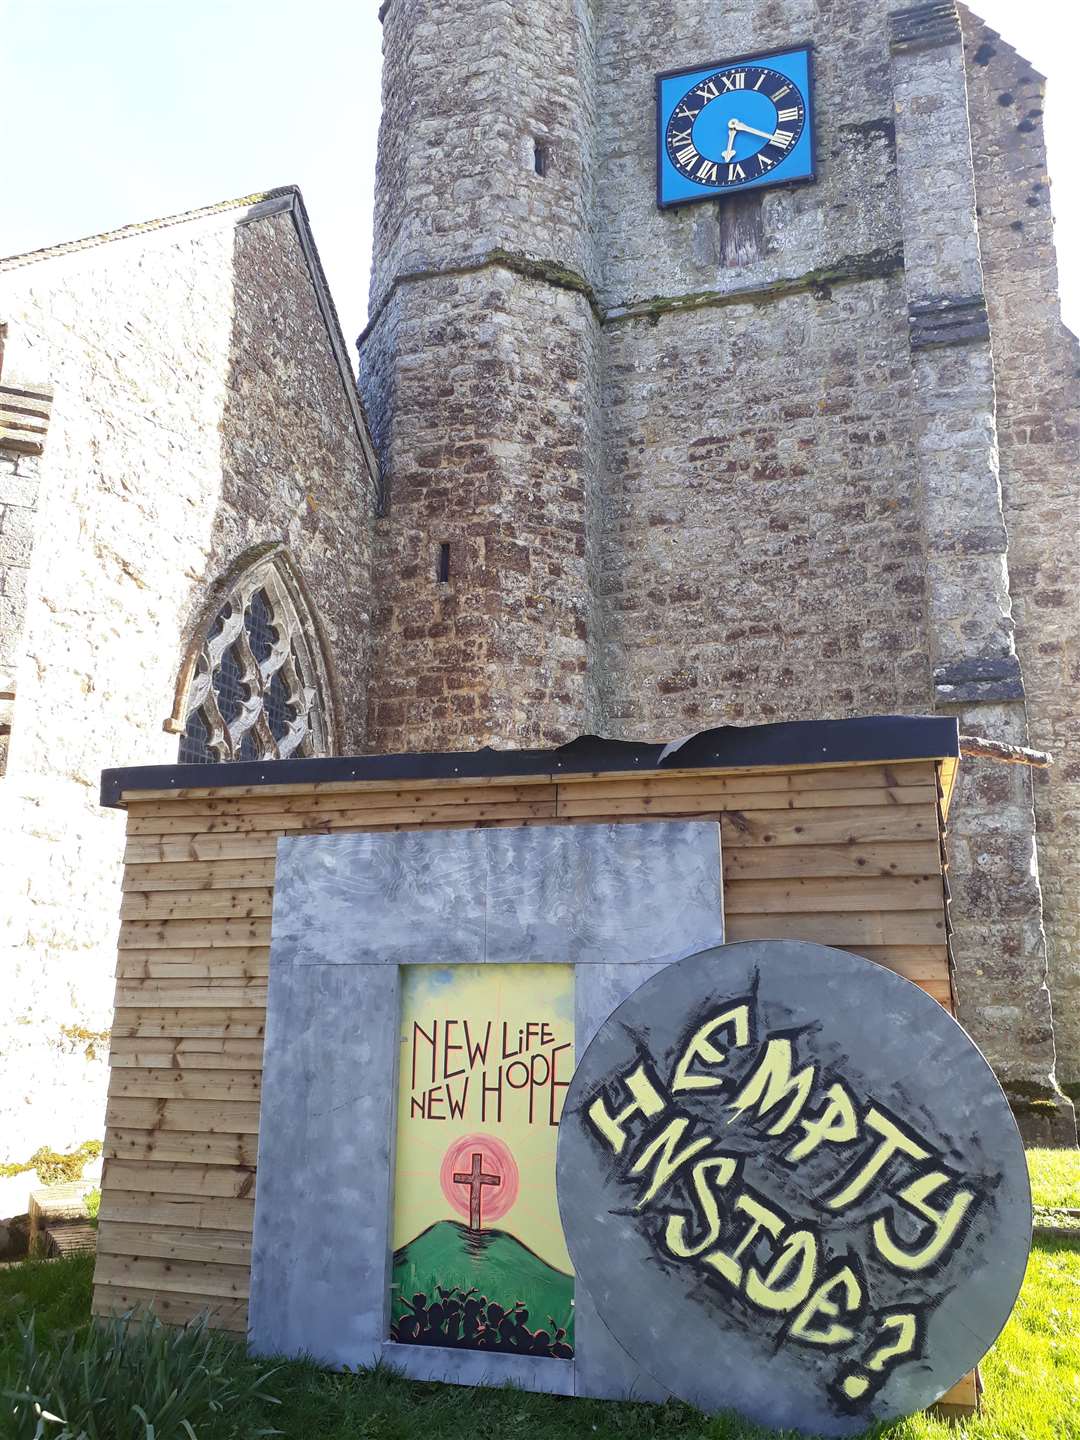 Liz Holland sent this picture for Snapshot Kent of what she has made in lockdown, to spread a bit of Easter hope, outside Lenham church, near Maidstone